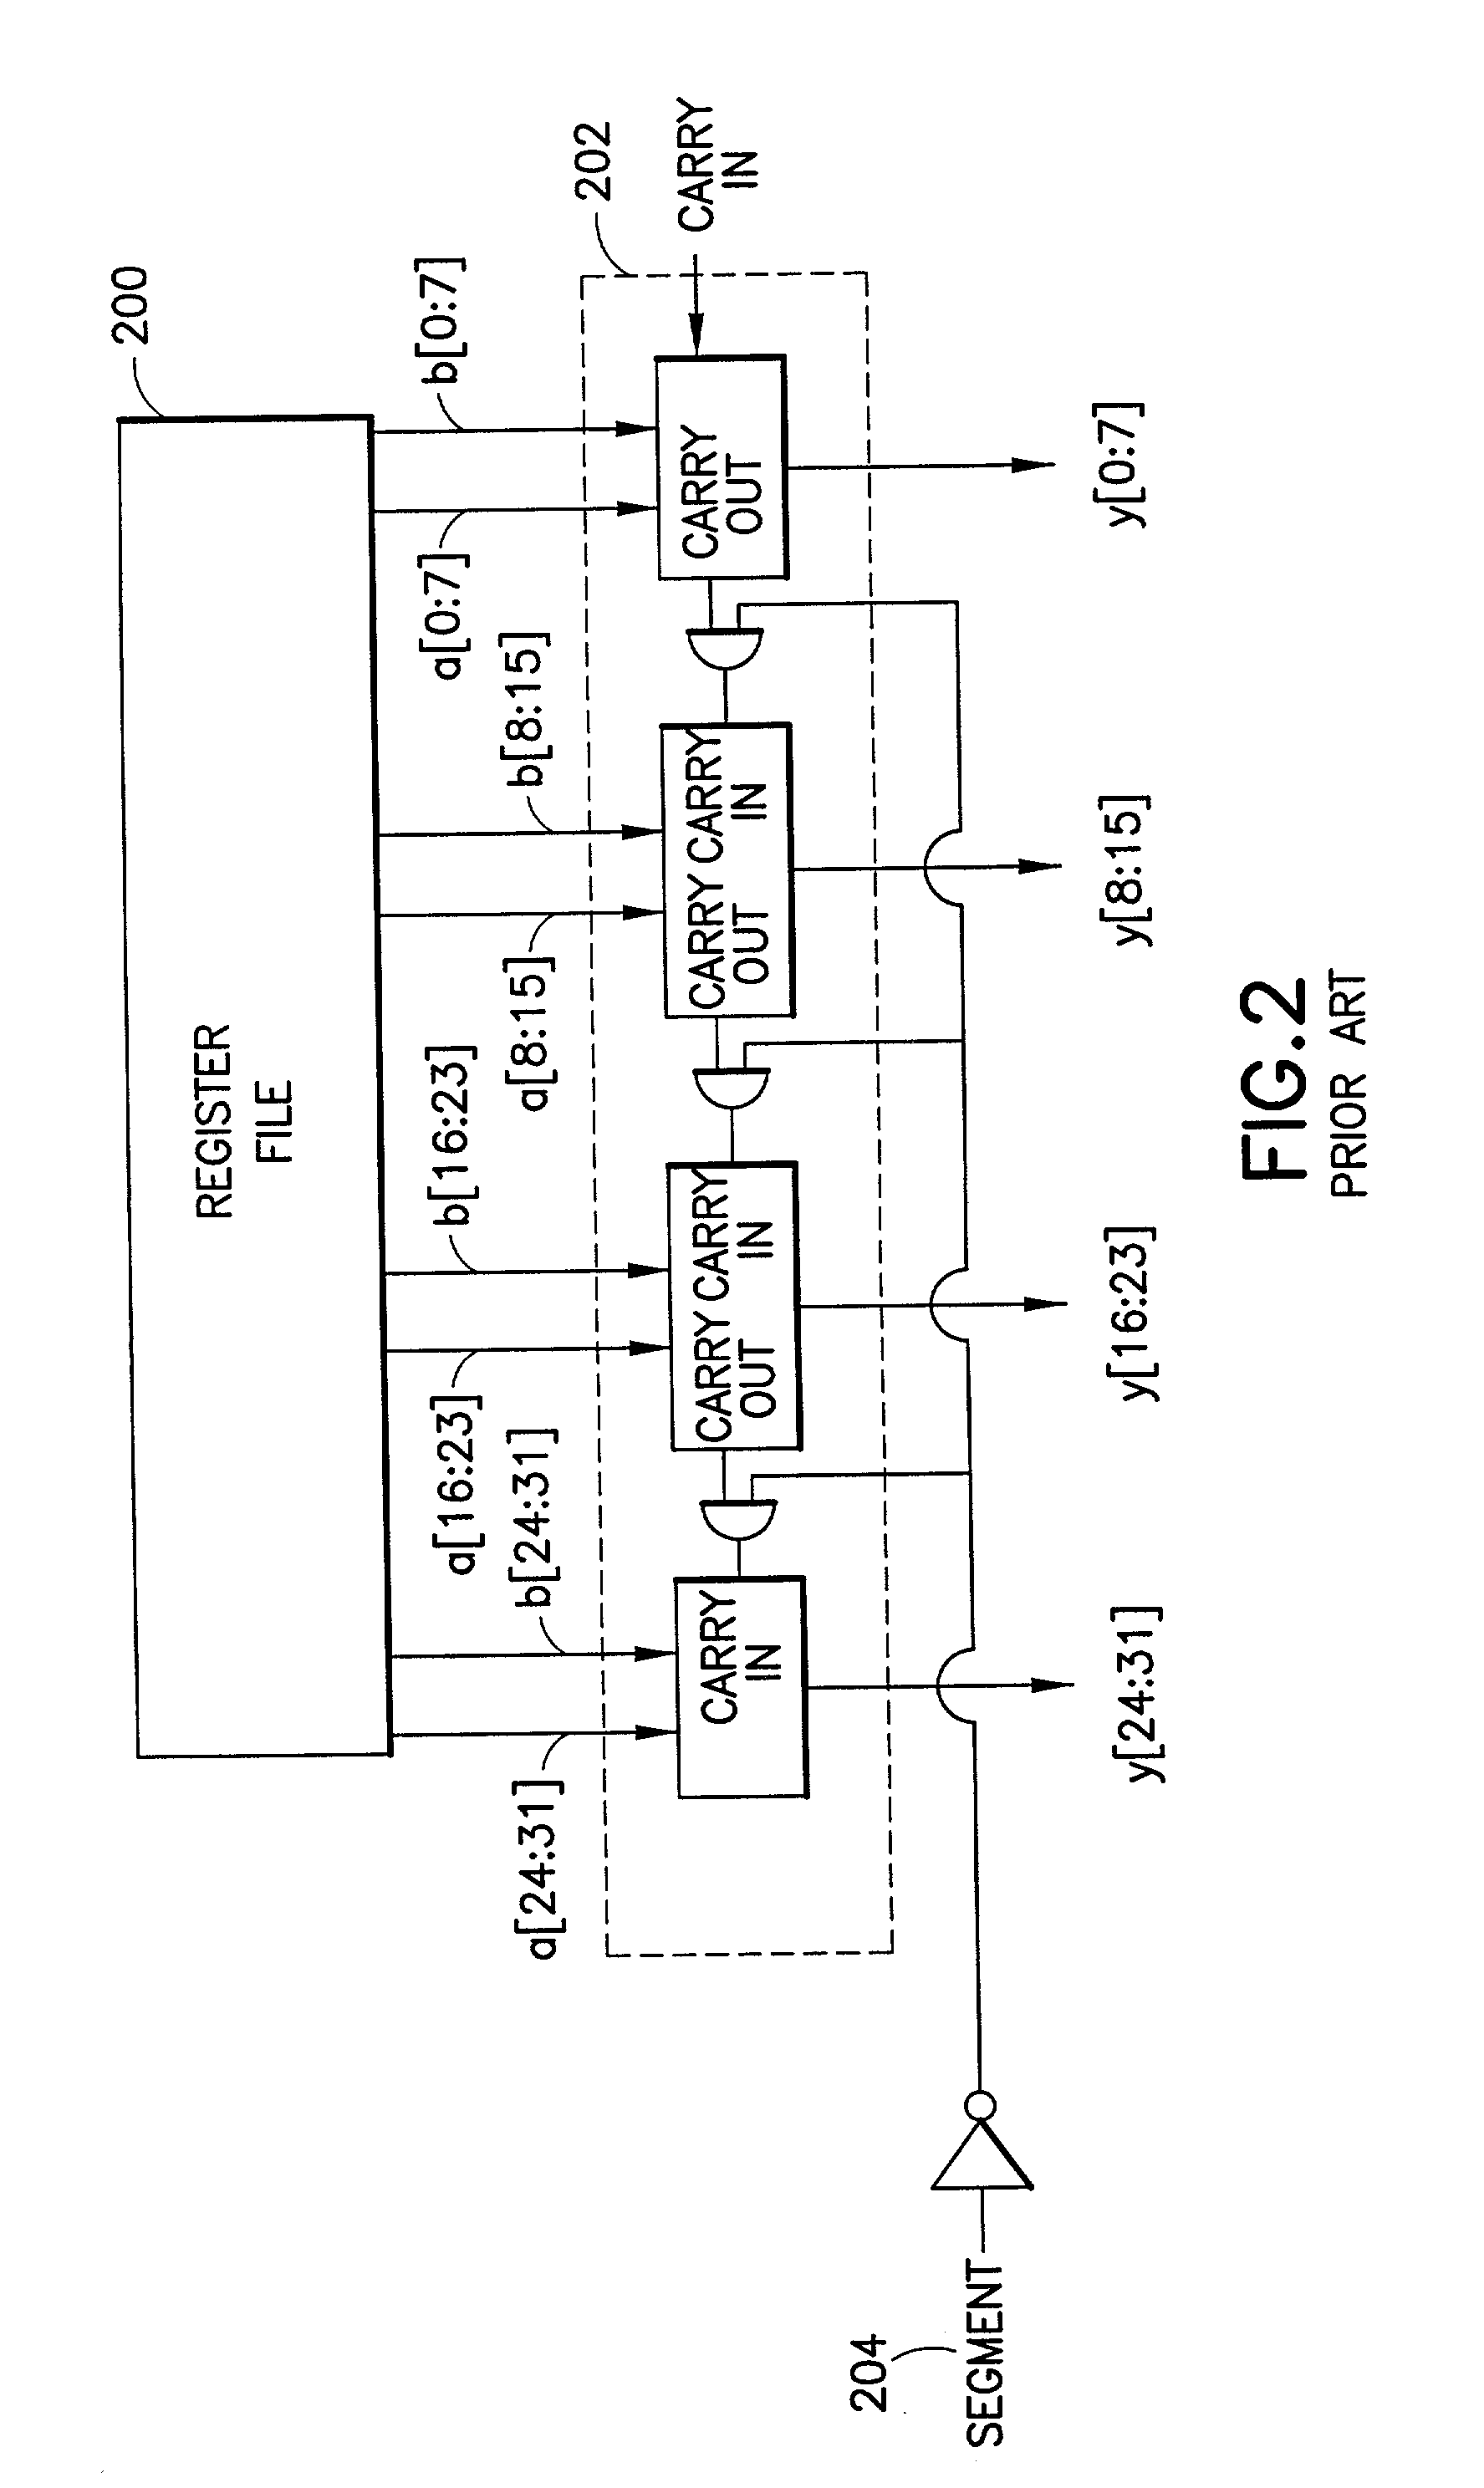 Processor implementation having unified scalar and SIMD datapath